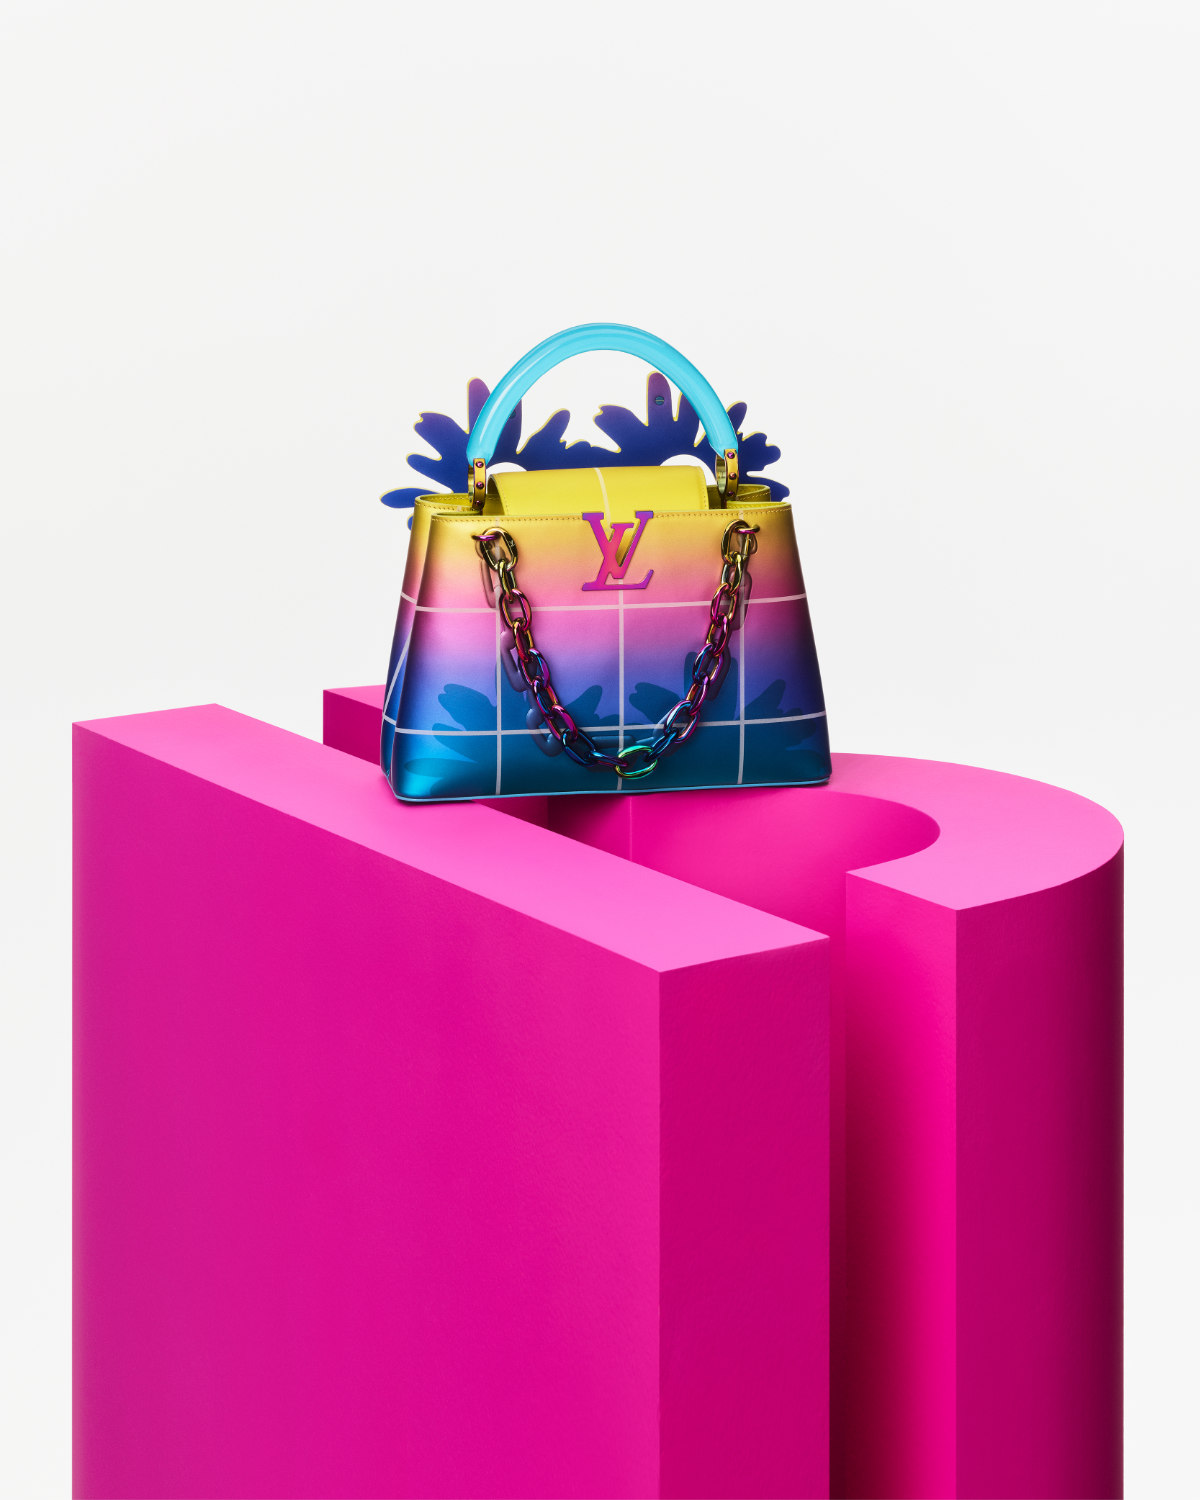 Louis Vuitton Presents Its New Artycapucines Collection